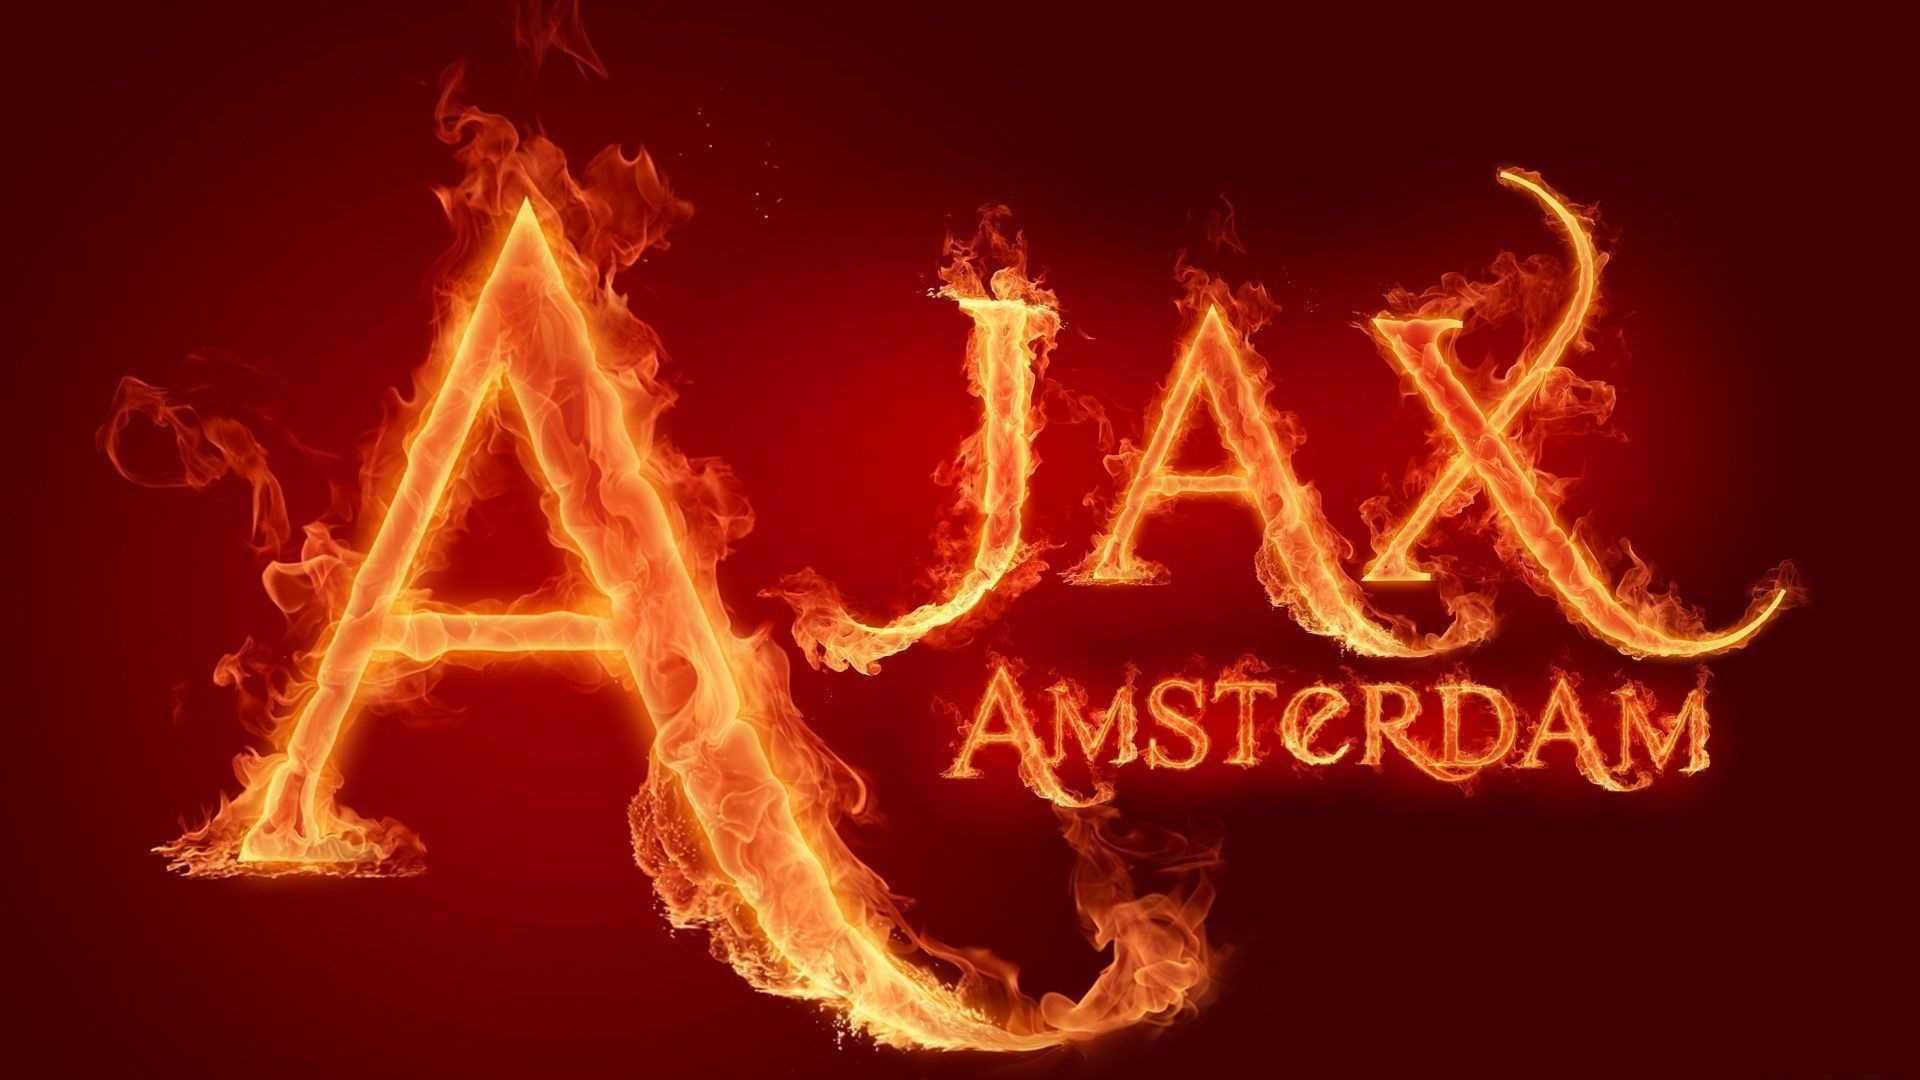 Ajax Wallpaper For Mac Backgrounds With high-resolution 1920X1080 pixel. You can use this wallpaper for your Desktop Computers, Mac Screensavers, Windows Backgrounds, iPhone Wallpapers, Tablet or Android Lock screen and another Mobile device